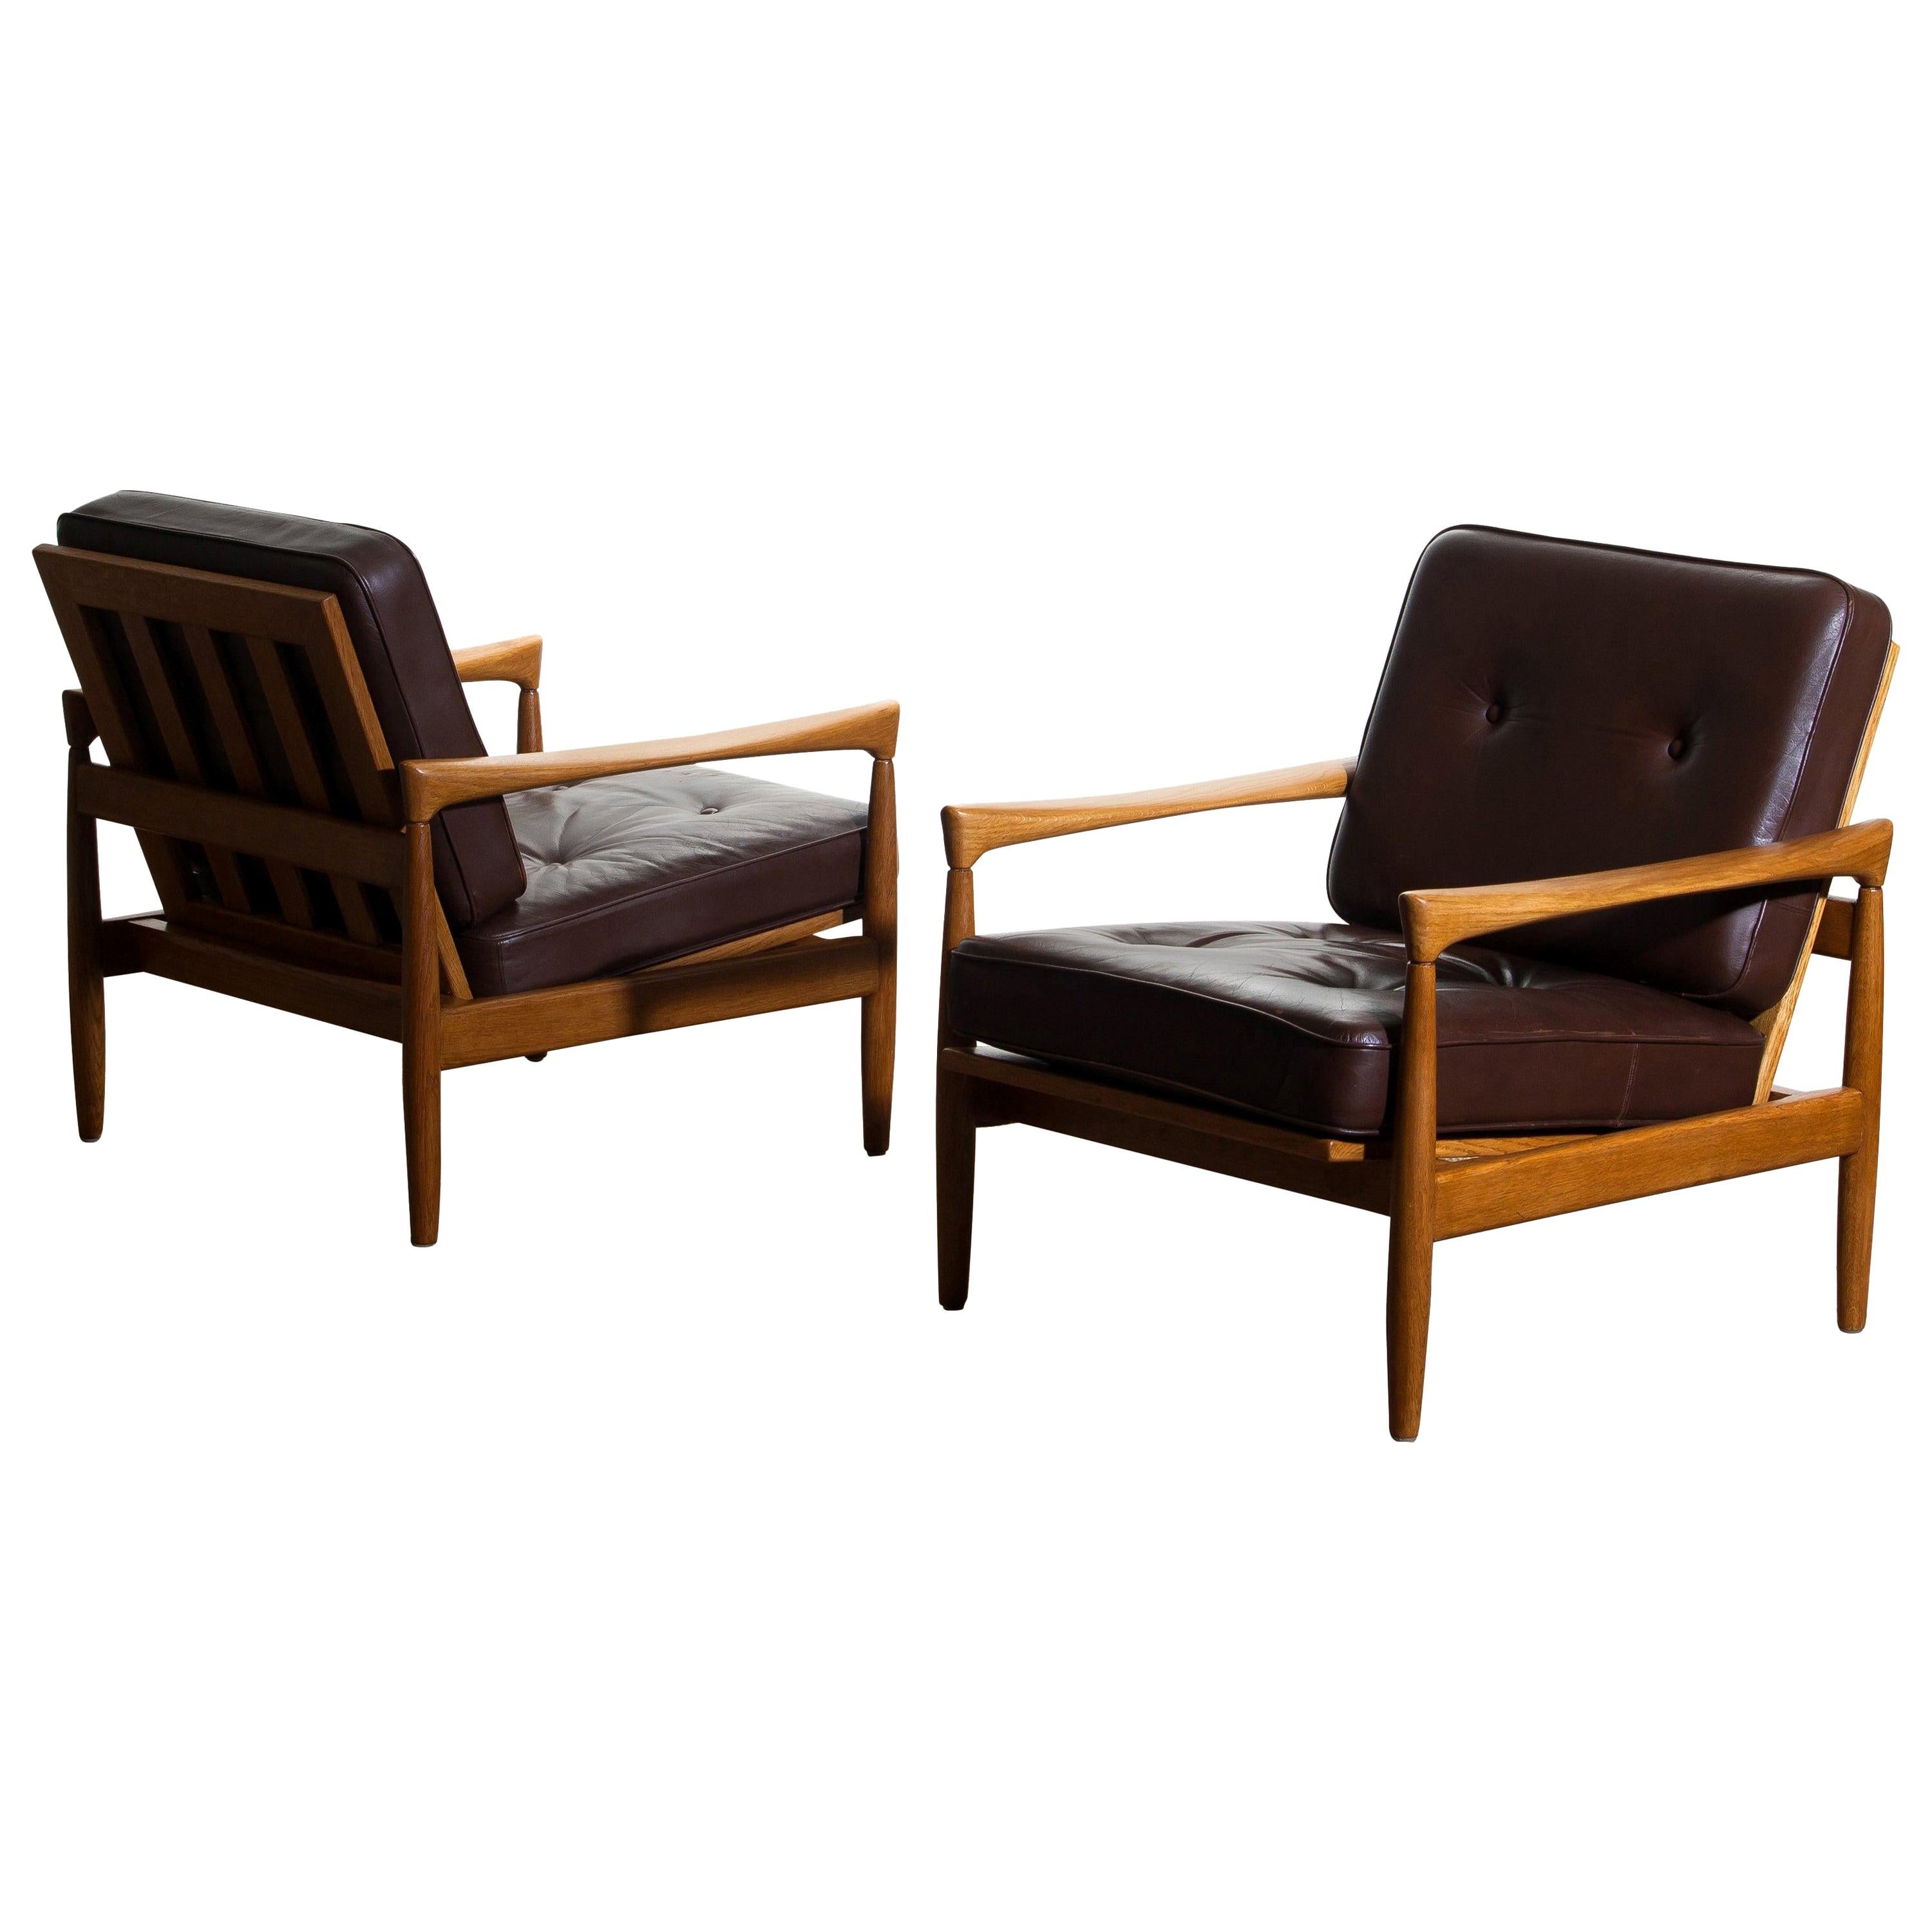 1960s, Set of Two Oak and Brown Leather Easy or Lounge Chairs by Erik Wörtz